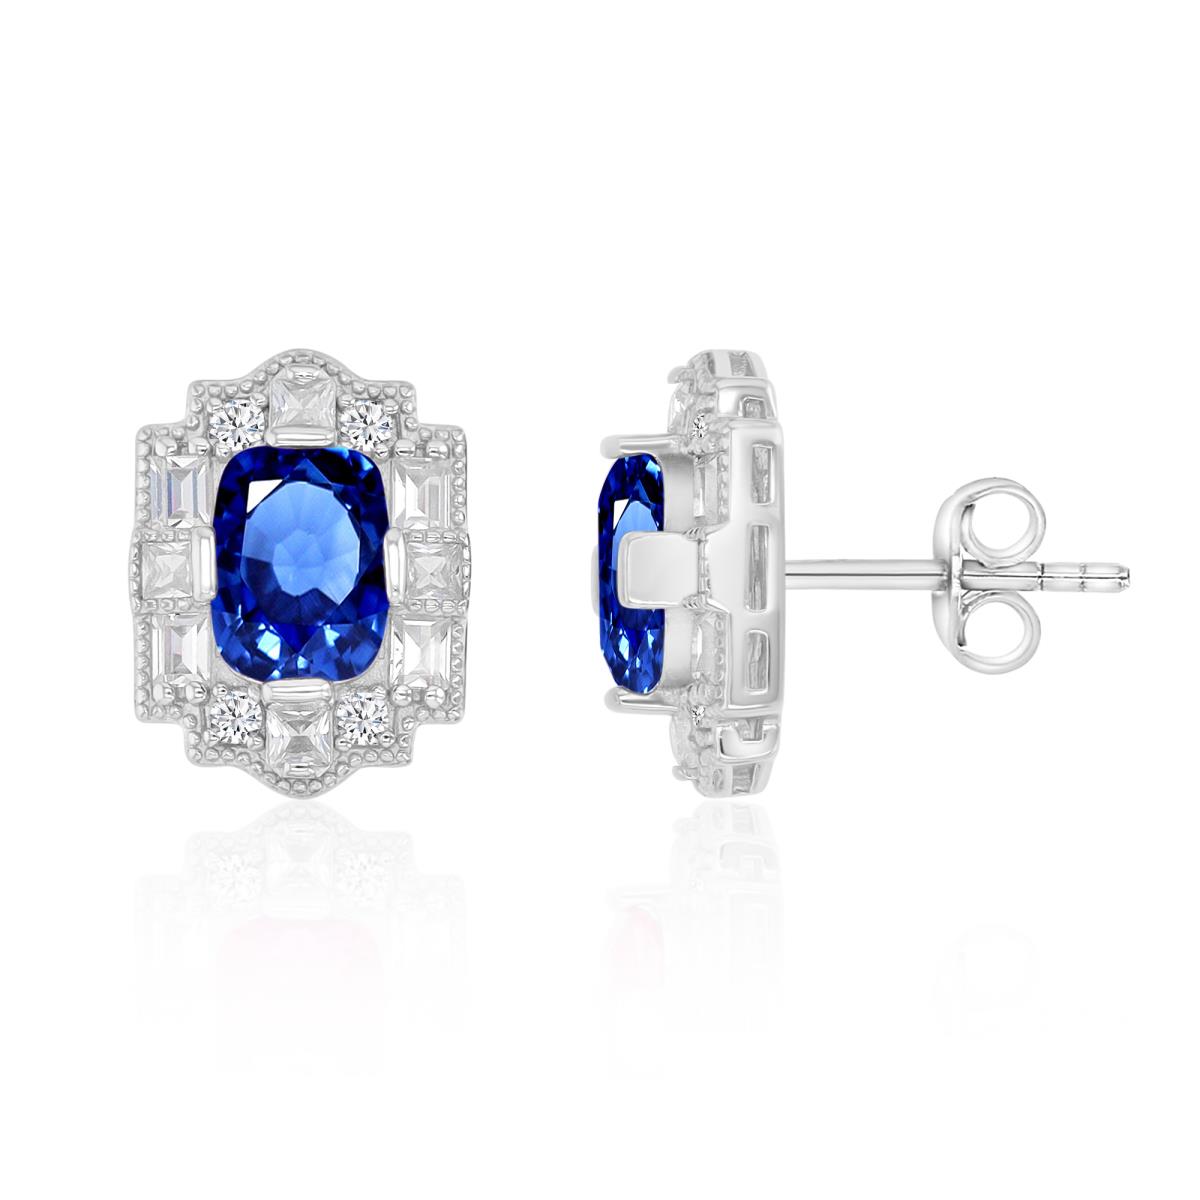 Sterling Silver Rhodium 15X11MM Polished Blue Spinel & Cr White Sapphire Vintage Cushion Cut Stud Earrings